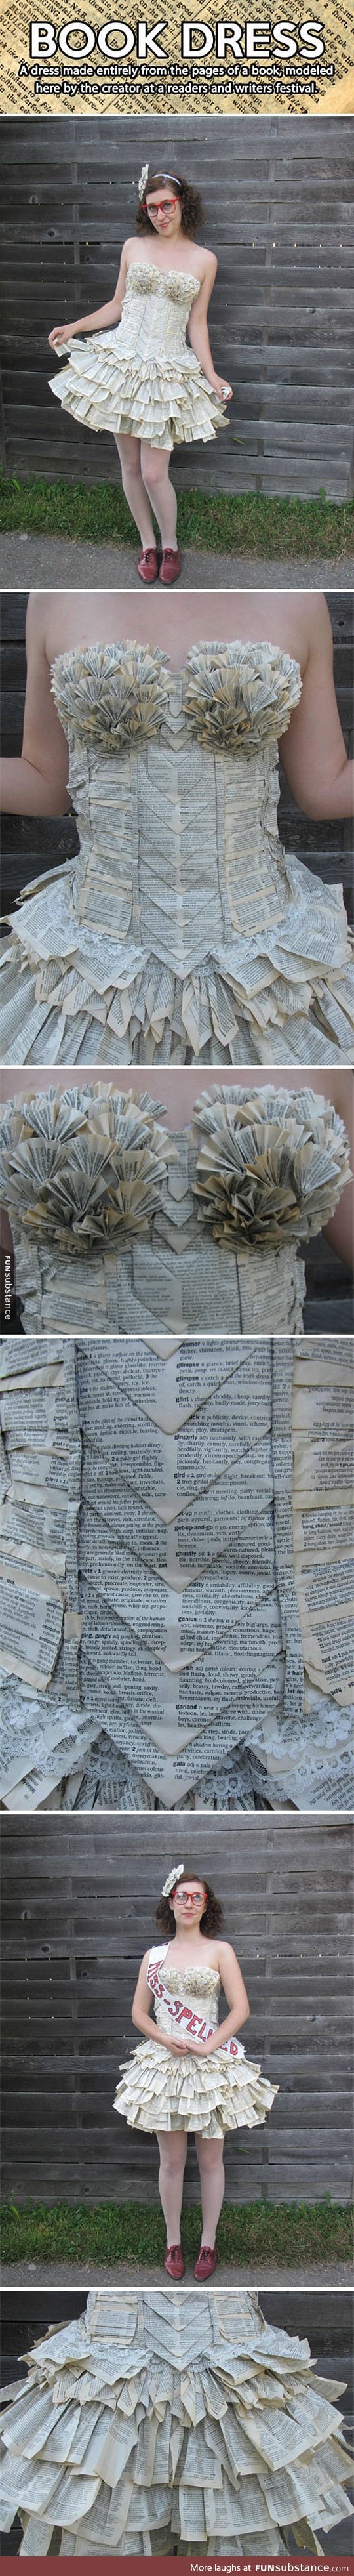 Epic dress made from pages of a book